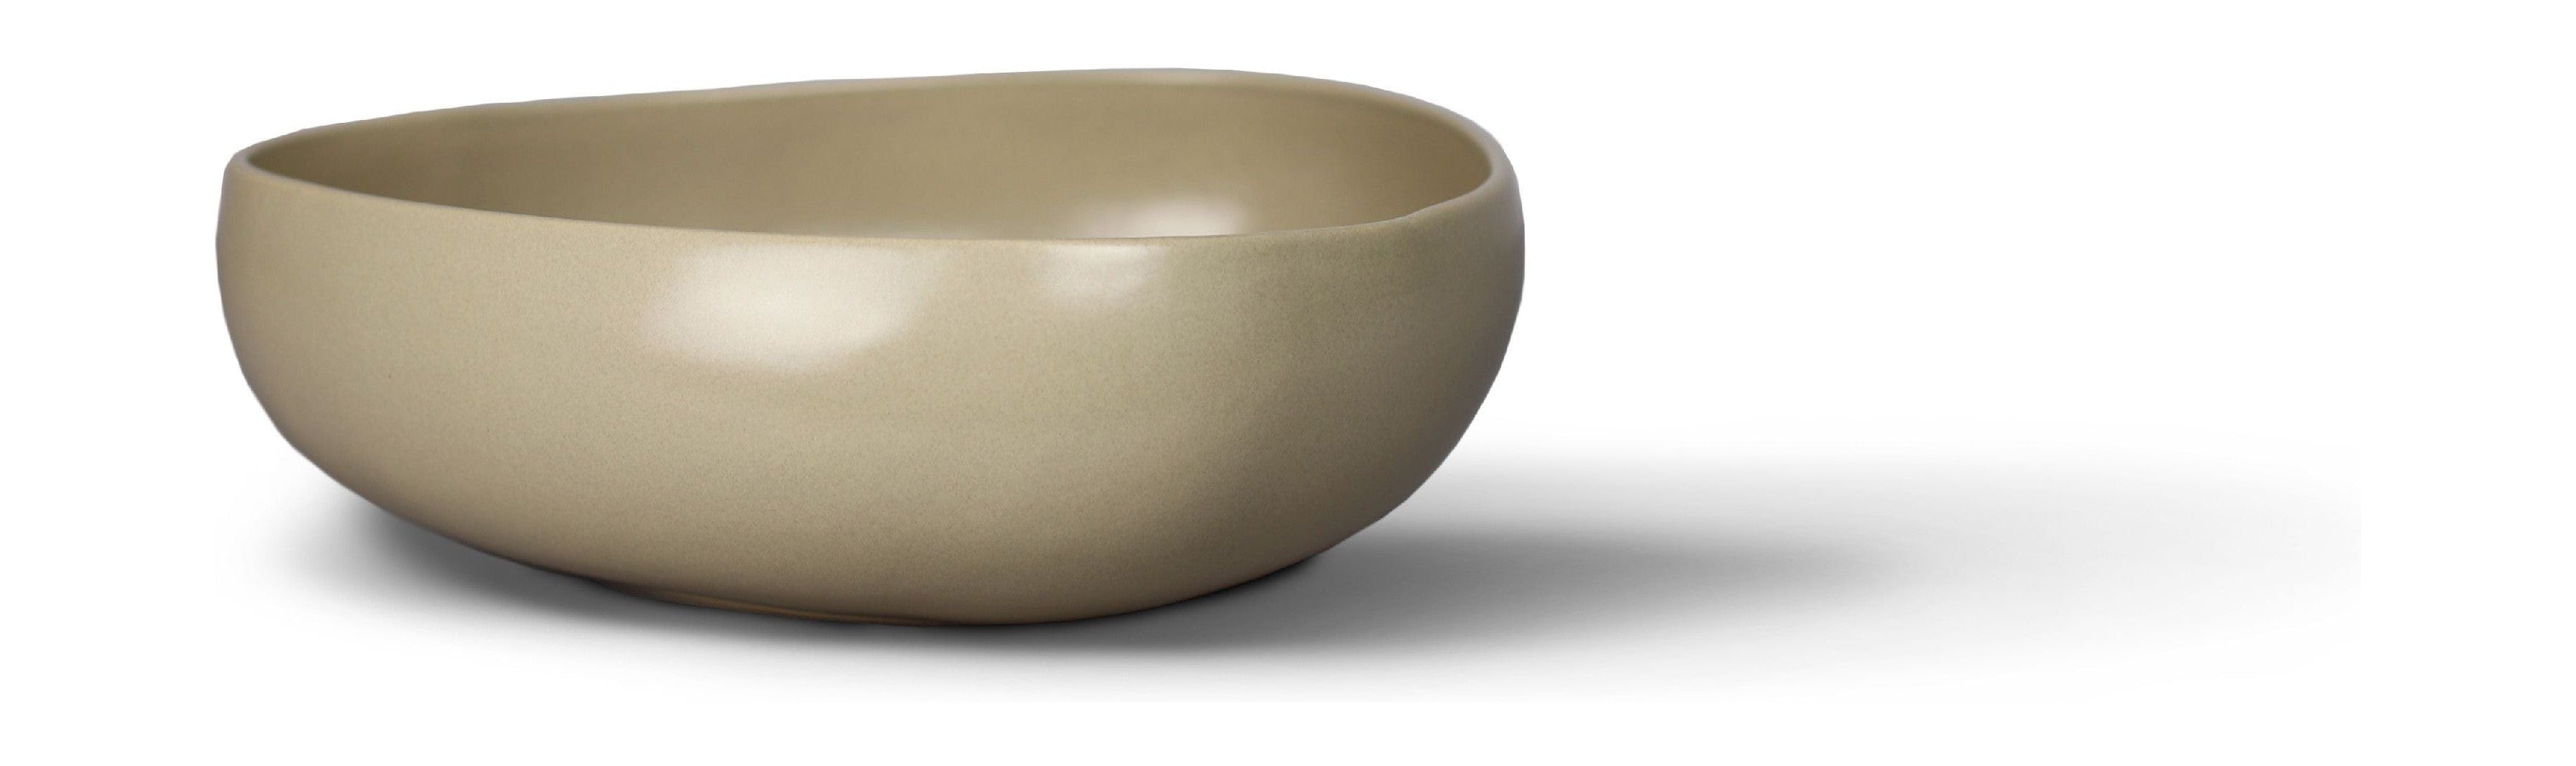 Ro Collection Signature Bowl X Large, Soft Sand